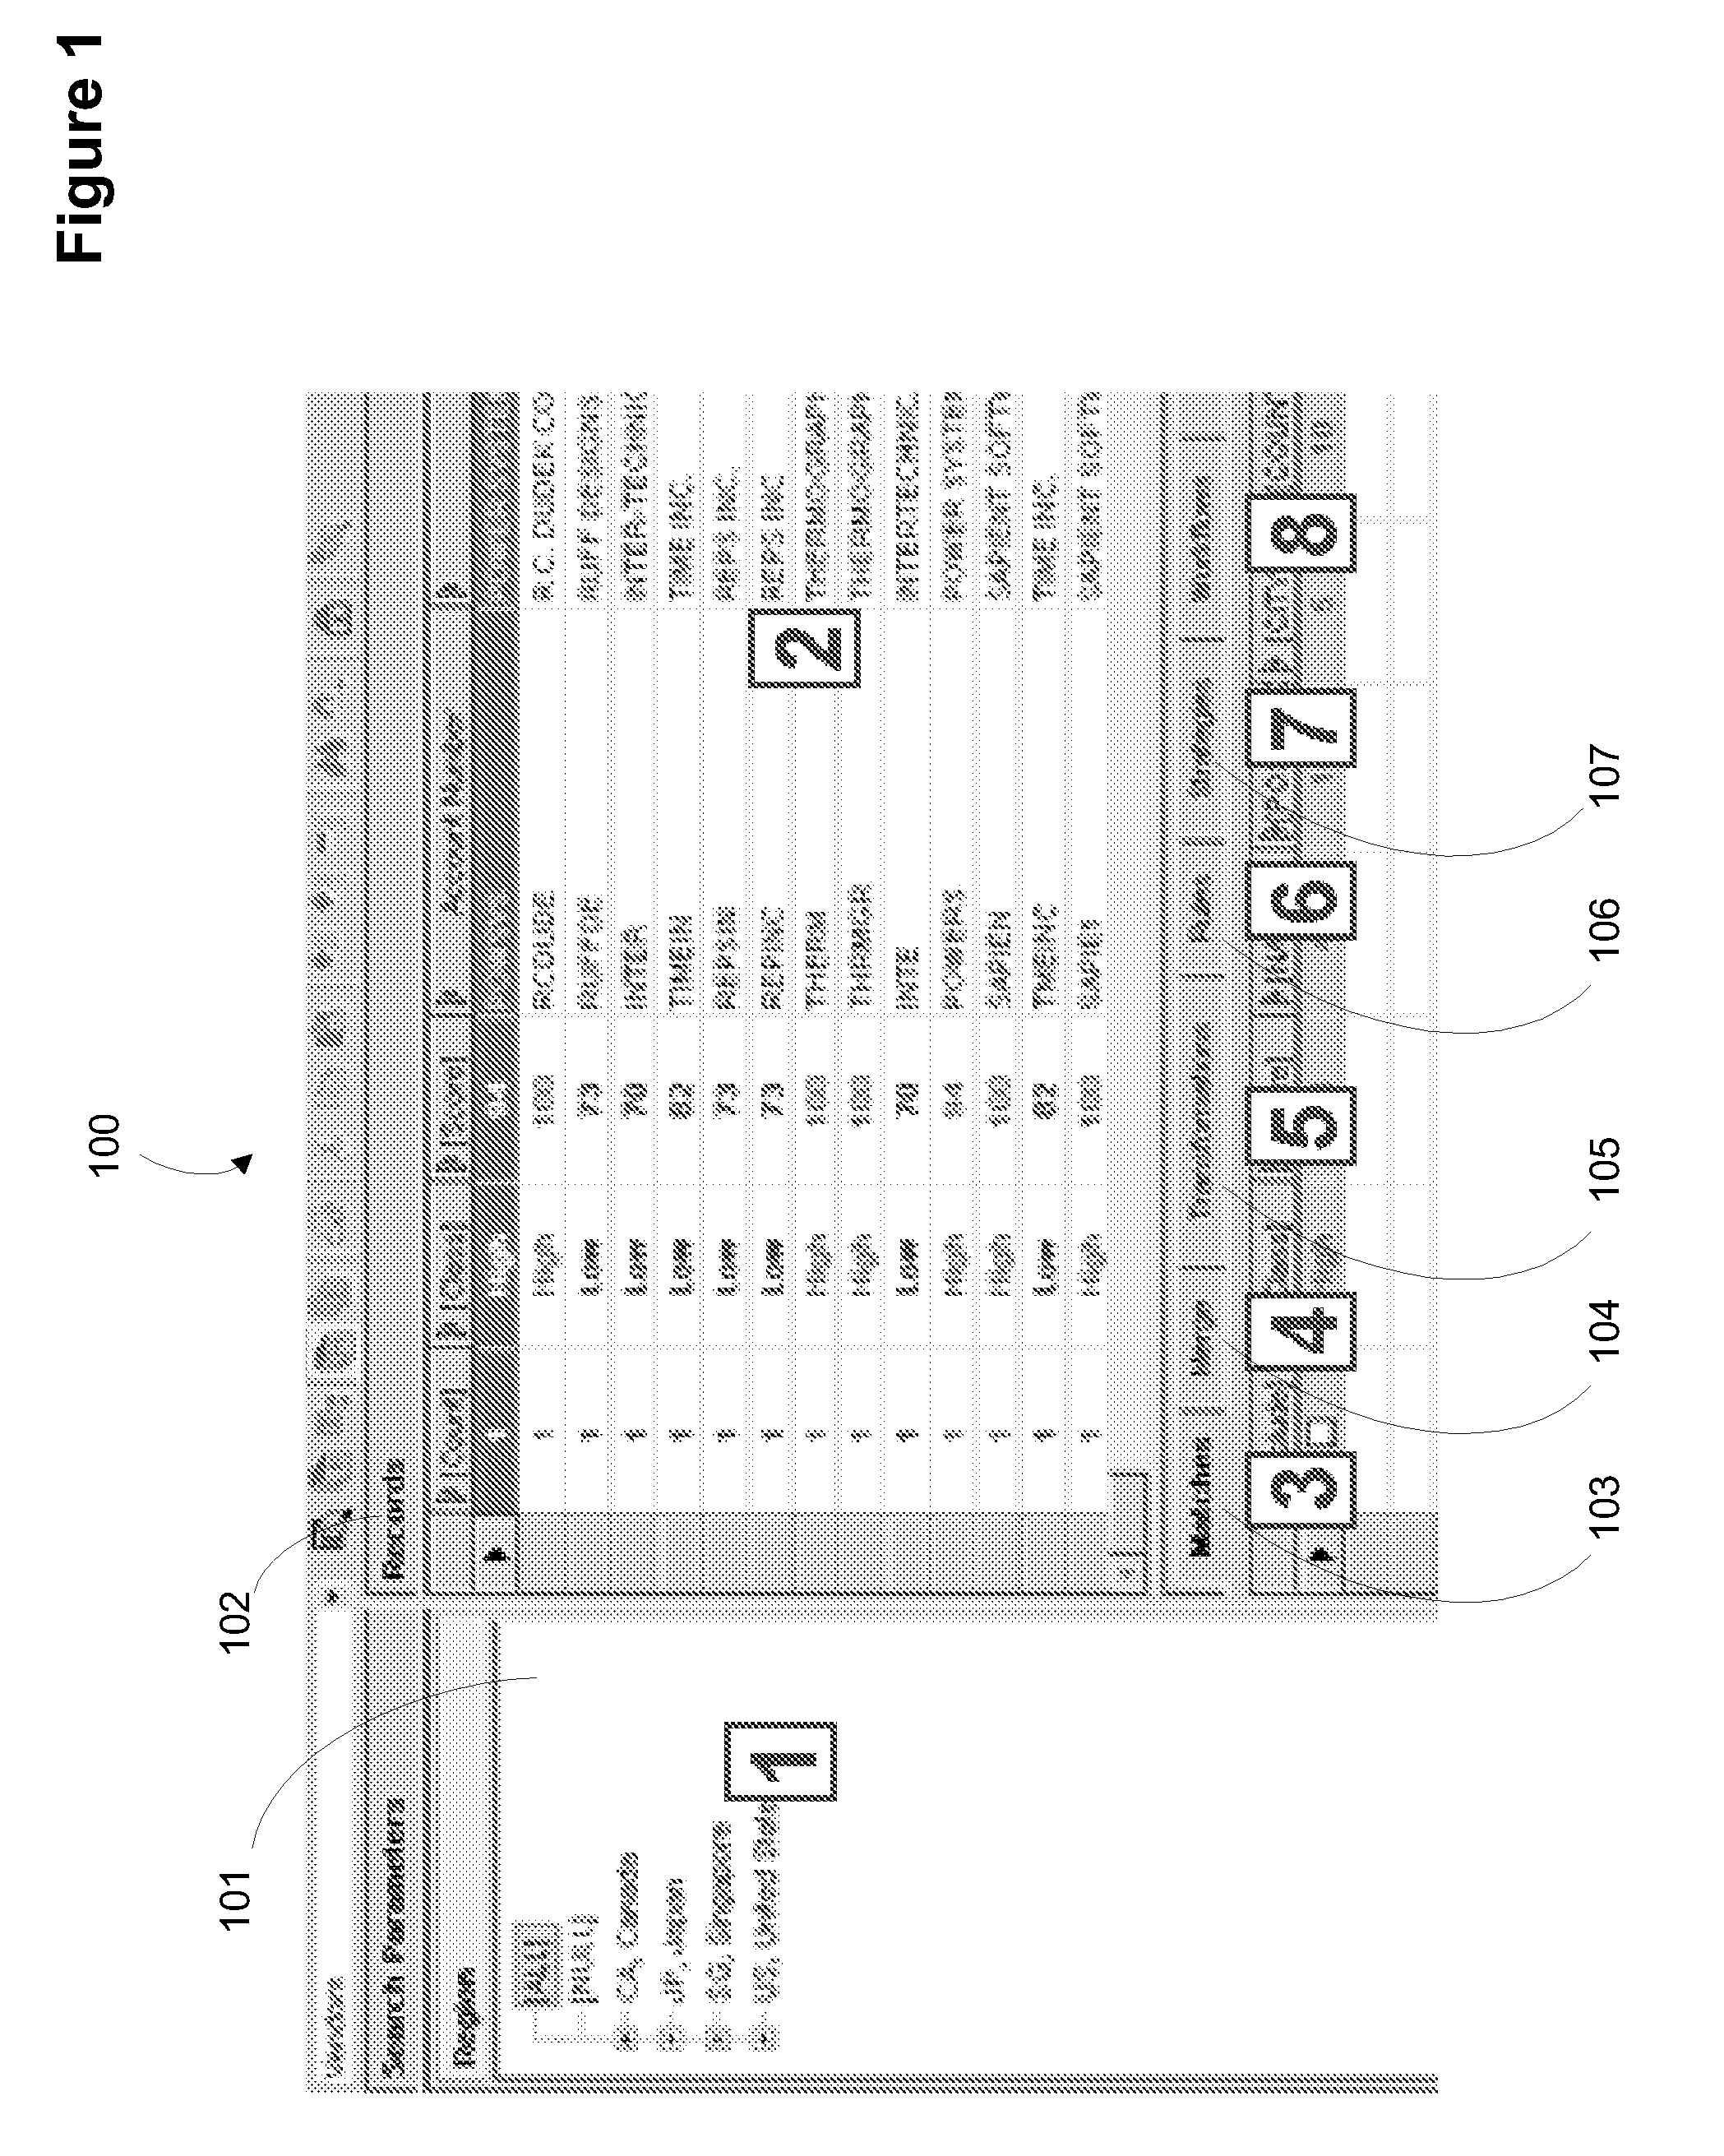 Method and apparatus for matching non-normalized data values